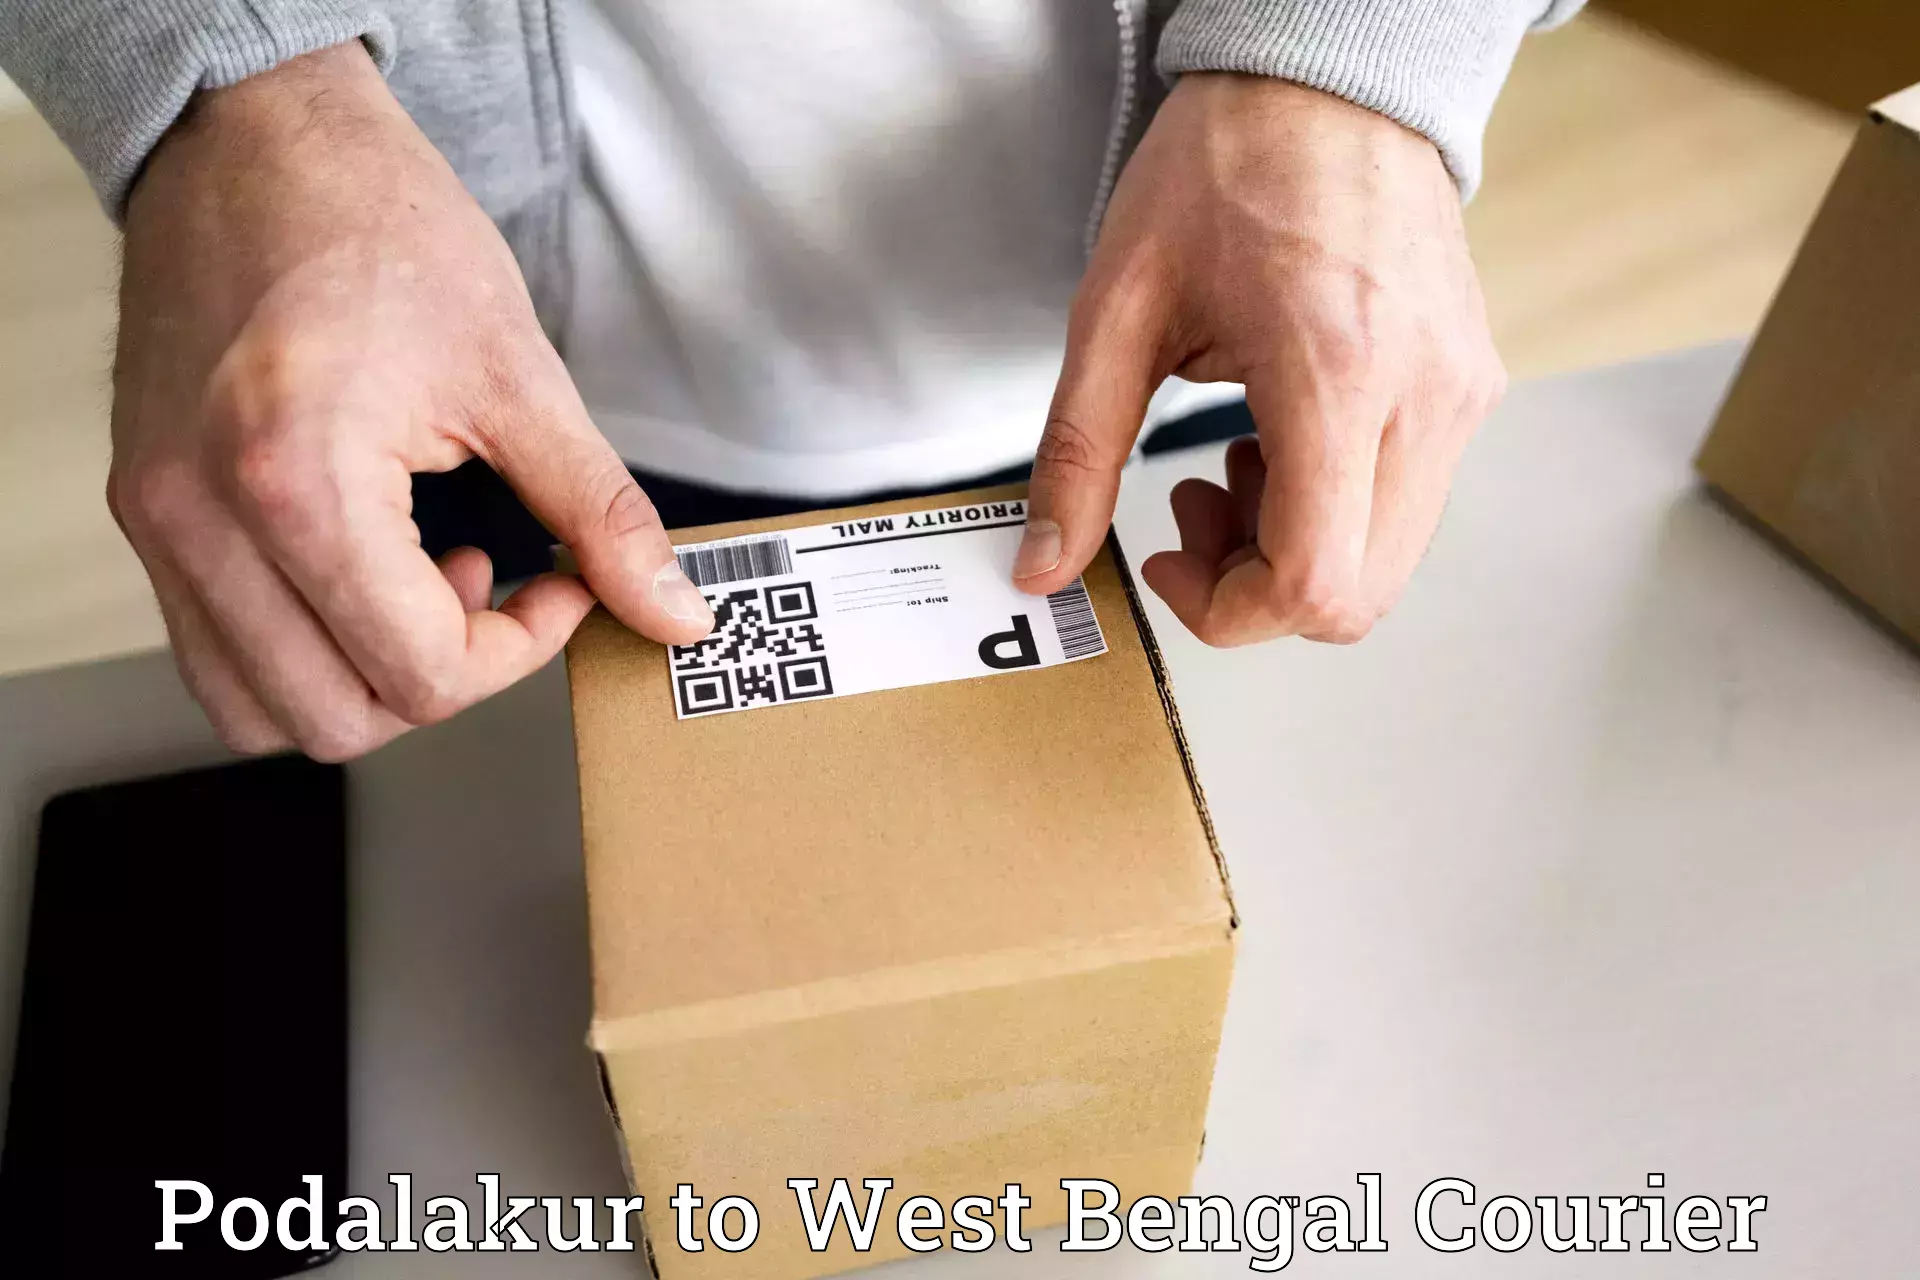 Reliable courier services in Podalakur to Kolkata Port